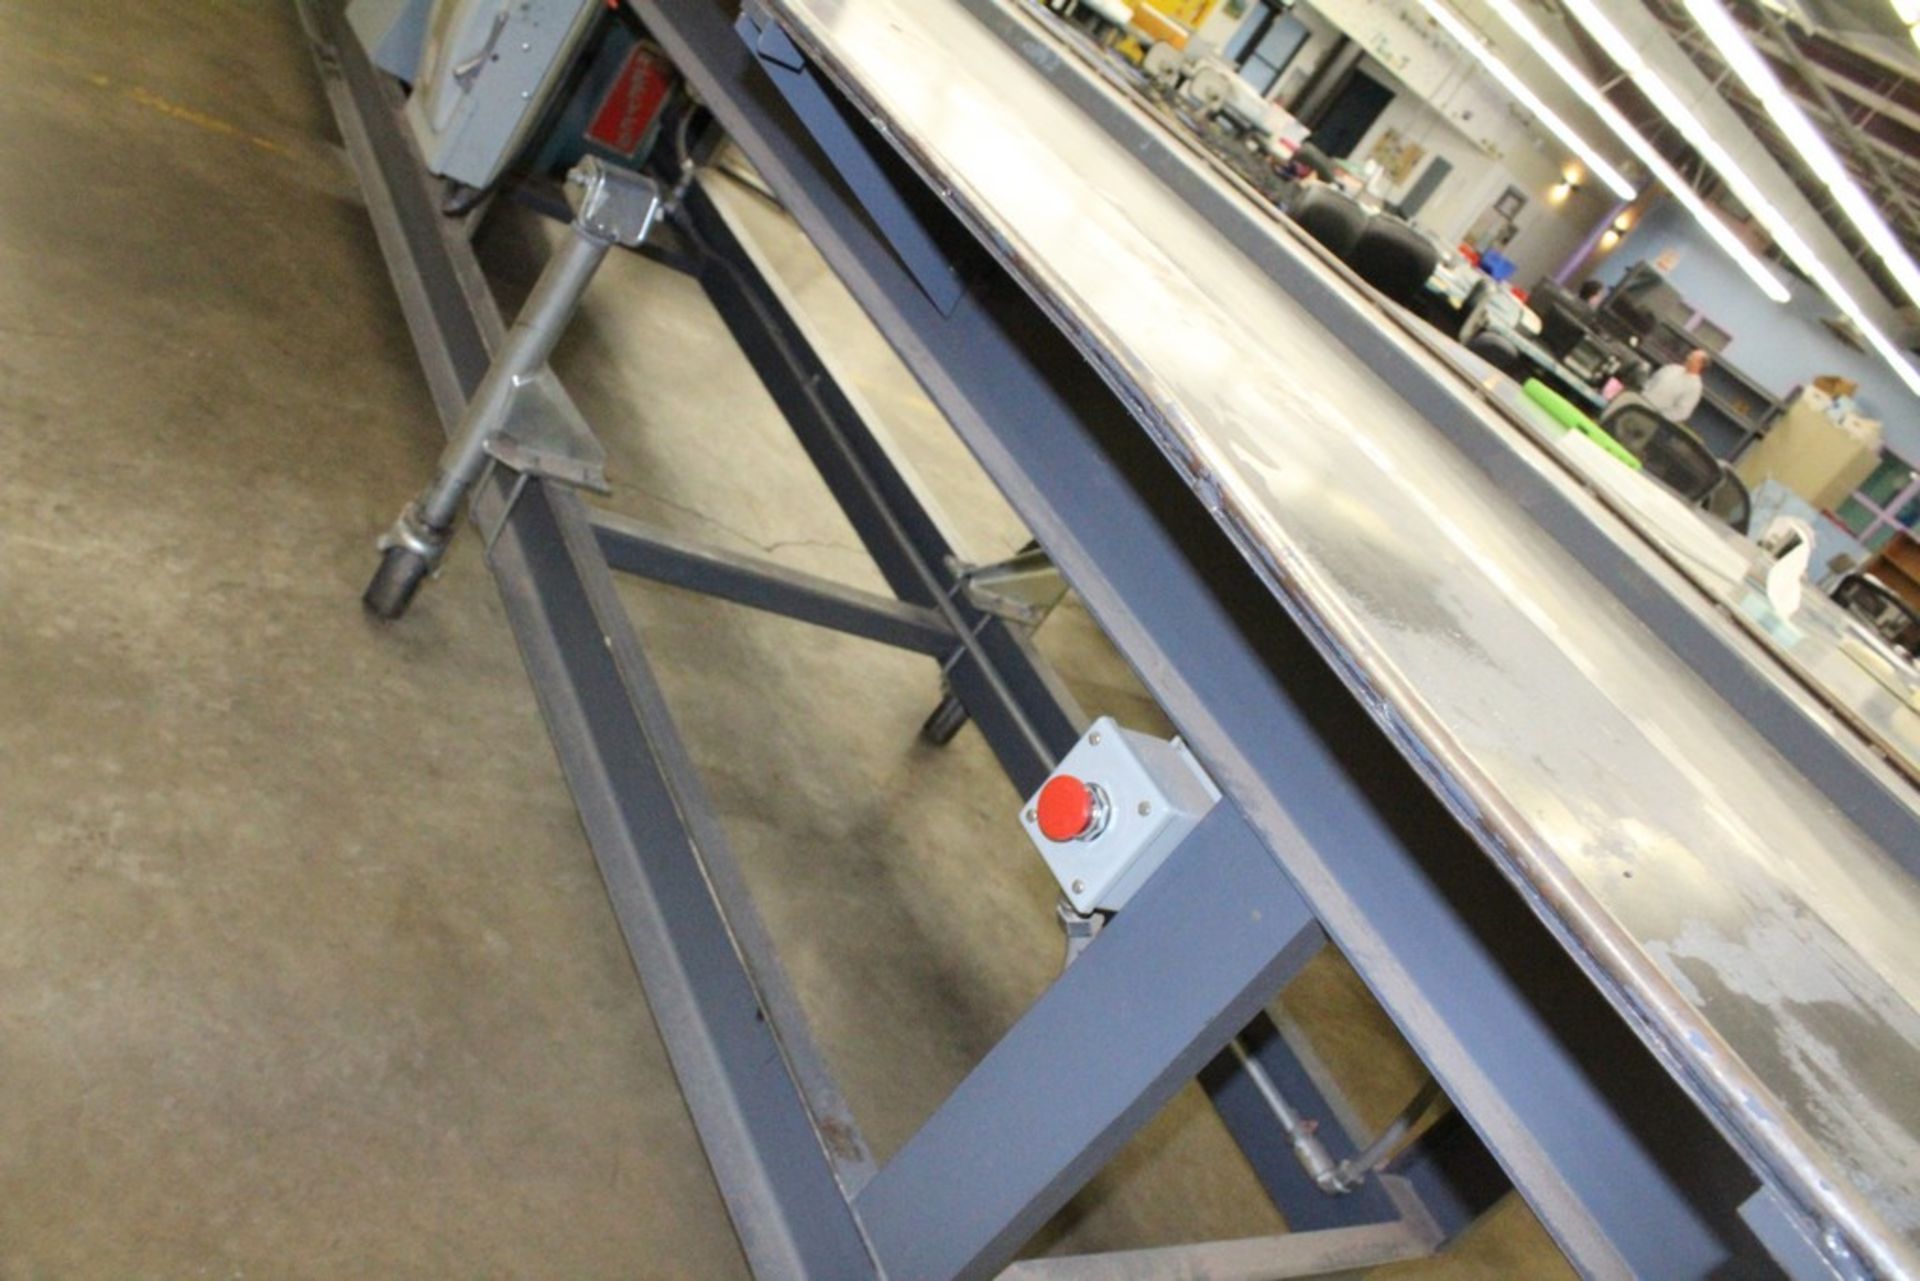 POWERED BELT CONVEYOR, APPROX 23'6" L X 24" W, WITH ALL RELATED MOTORS, STARTERS, SWITCHES, ETC. - Image 2 of 5